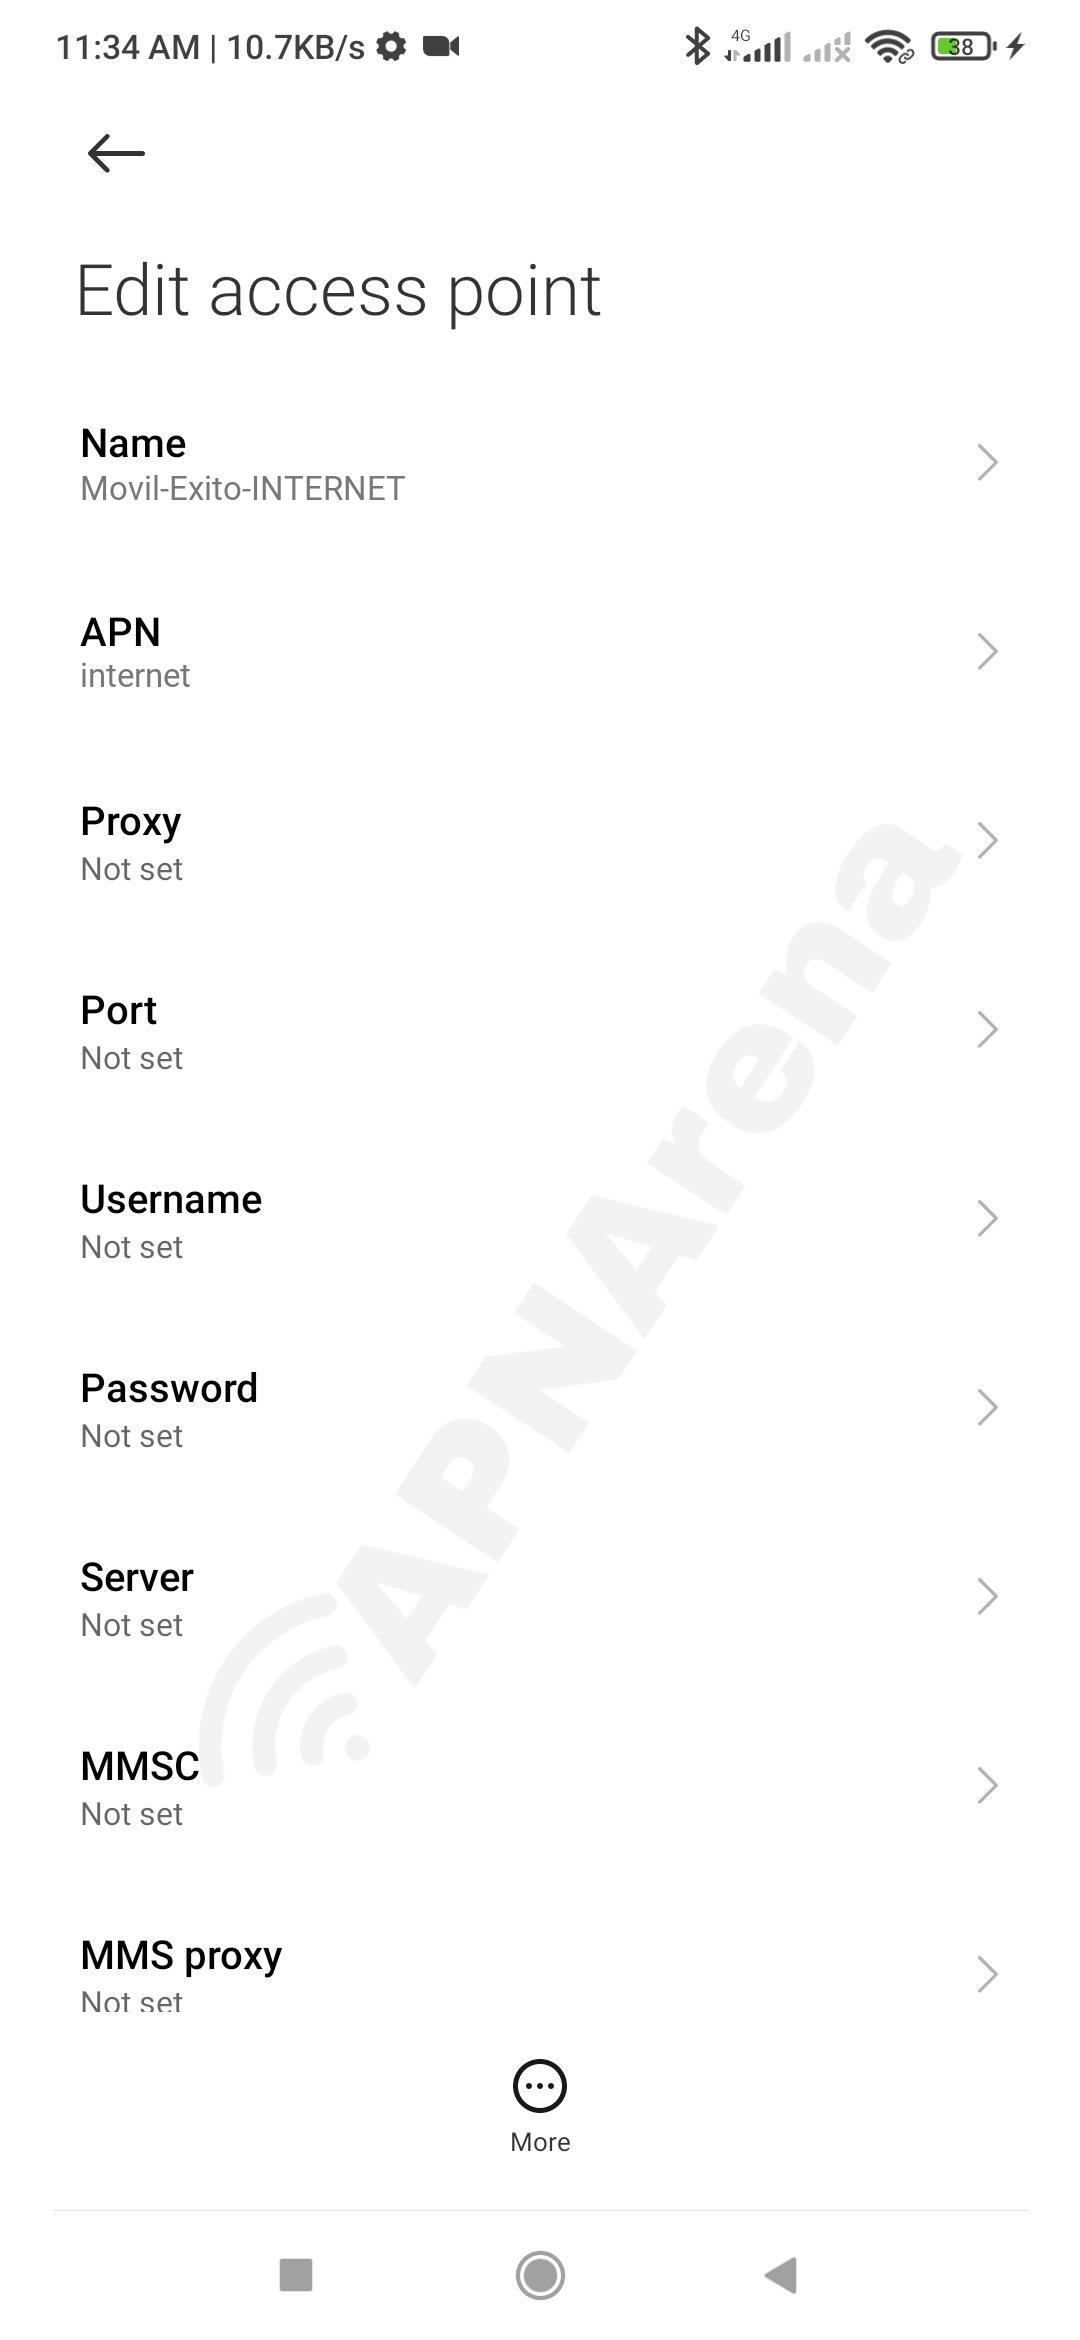 Móvil Éxito APN Settings for Android